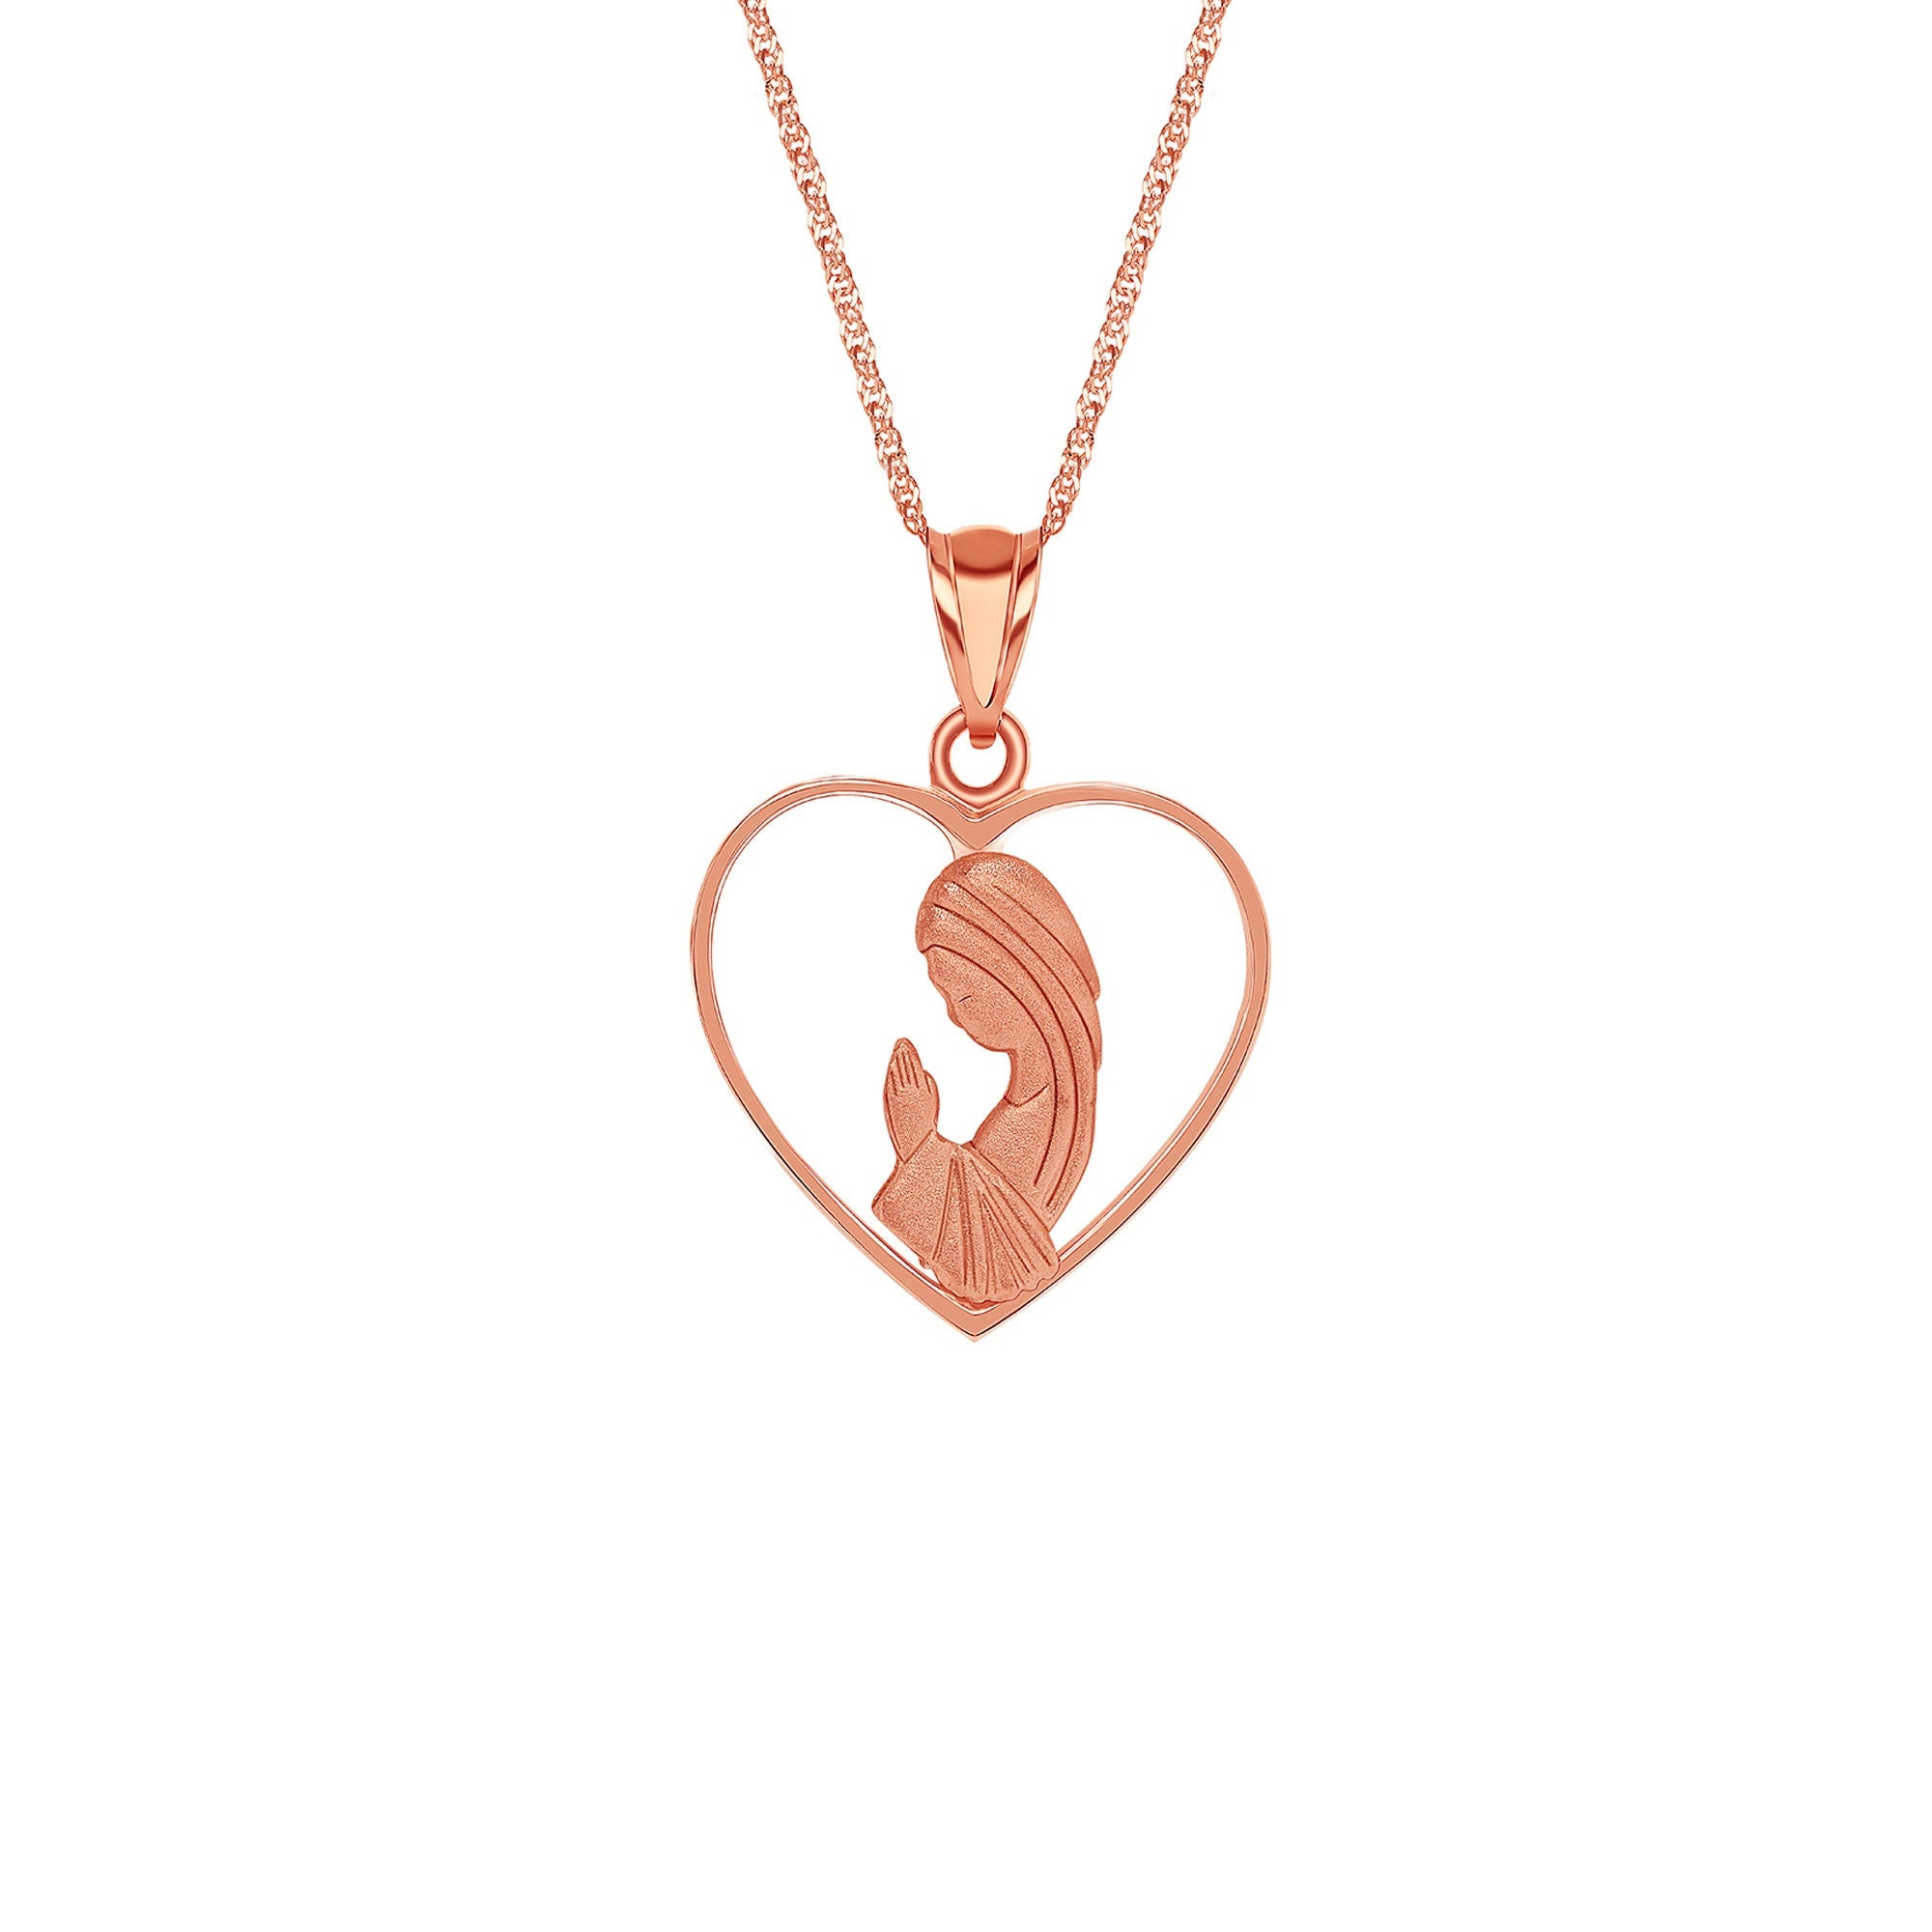 14k solid gold Praying Lady heart pendant on 18" chain